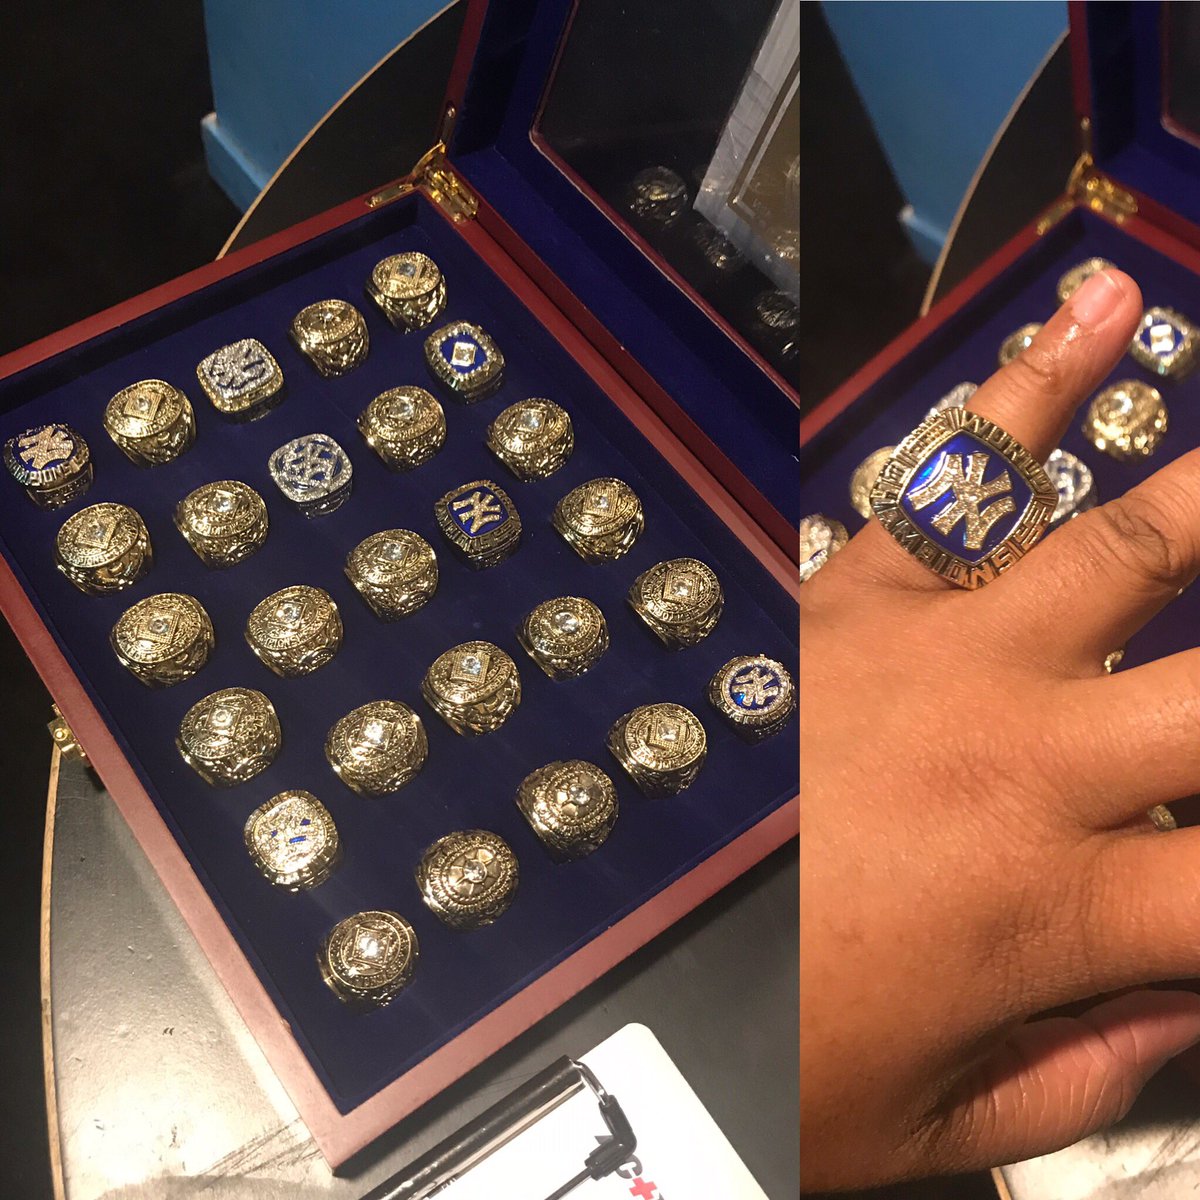 Supporting #harlemrotary tonight at their #harlemnights fundraiser. How cool is this?! A #Yankees #ringcollection being auctioned. #rcmnyc #rotarylife #harlem #nyc